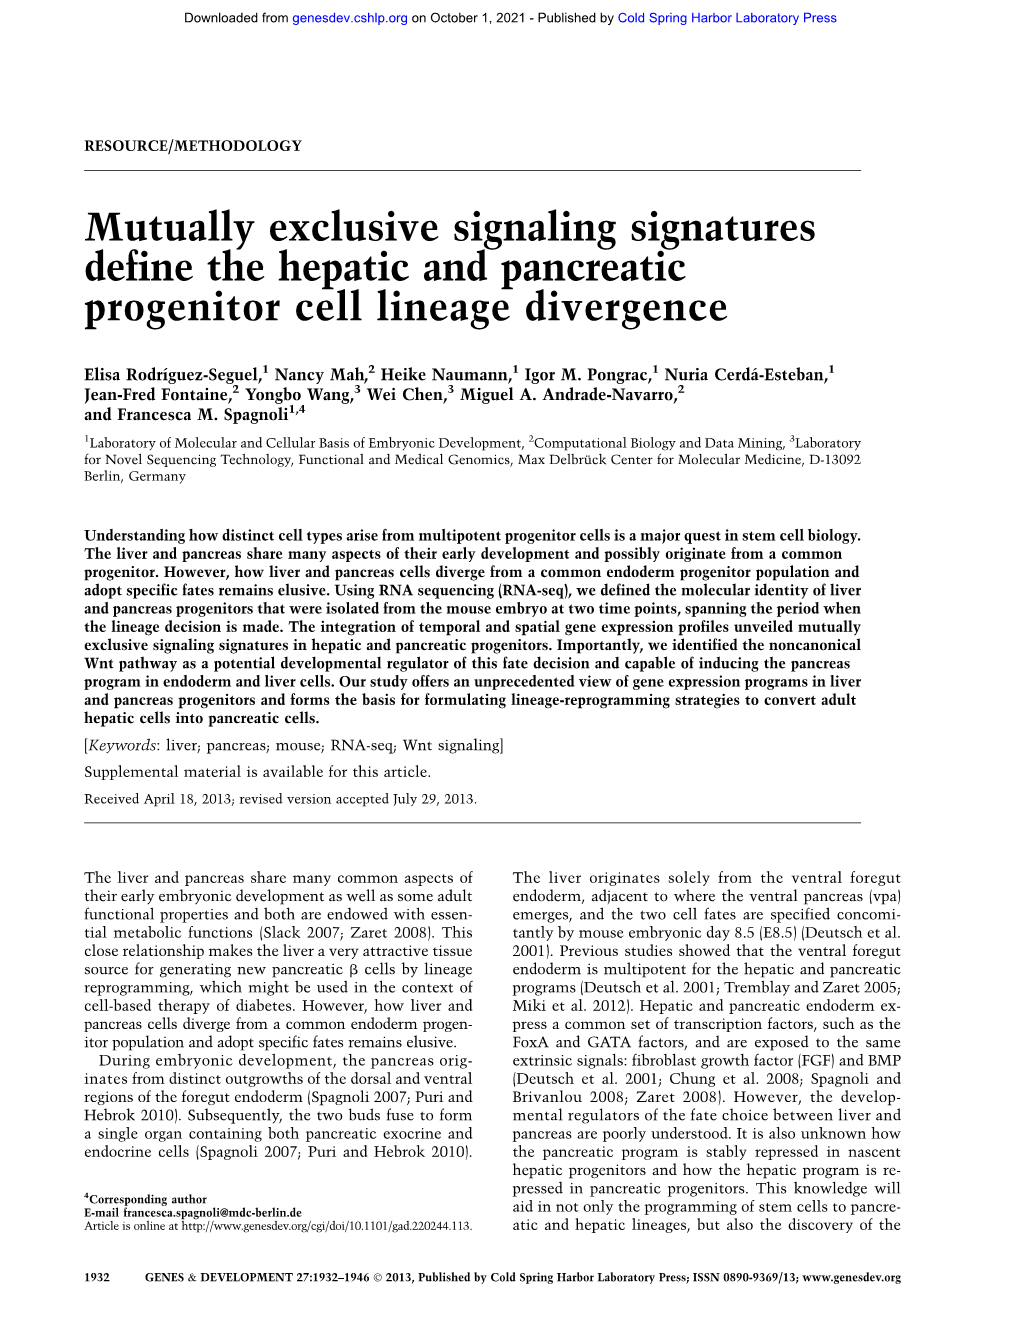 Mutually Exclusive Signaling Signatures Define the Hepatic and Pancreatic Progenitor Cell Lineage Divergence